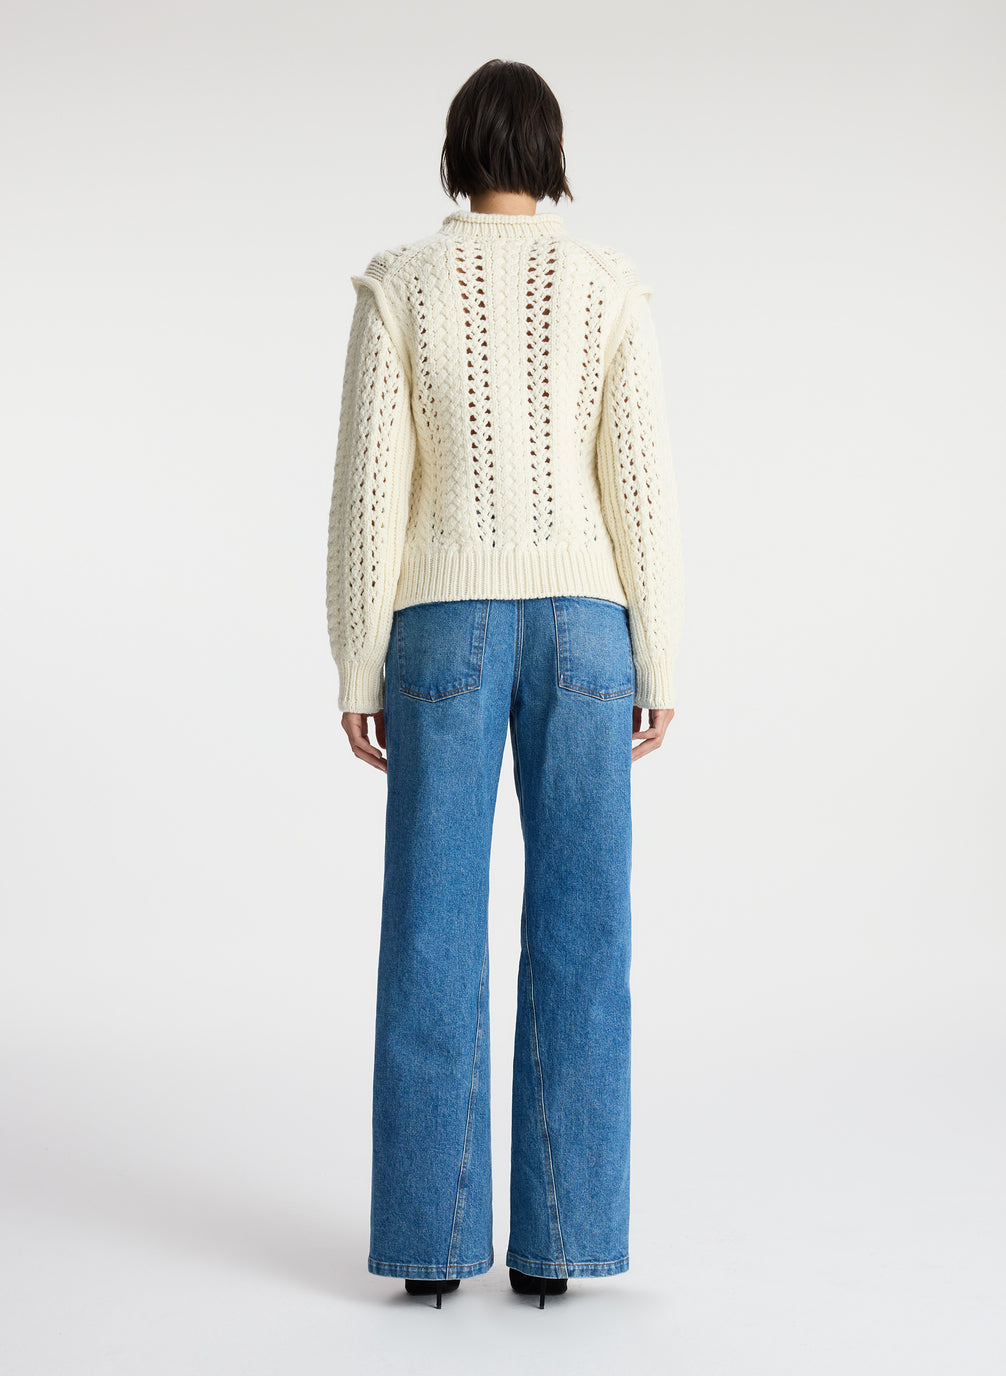 back view of woman wearing cream open knit sweater and medium wash denim jeans